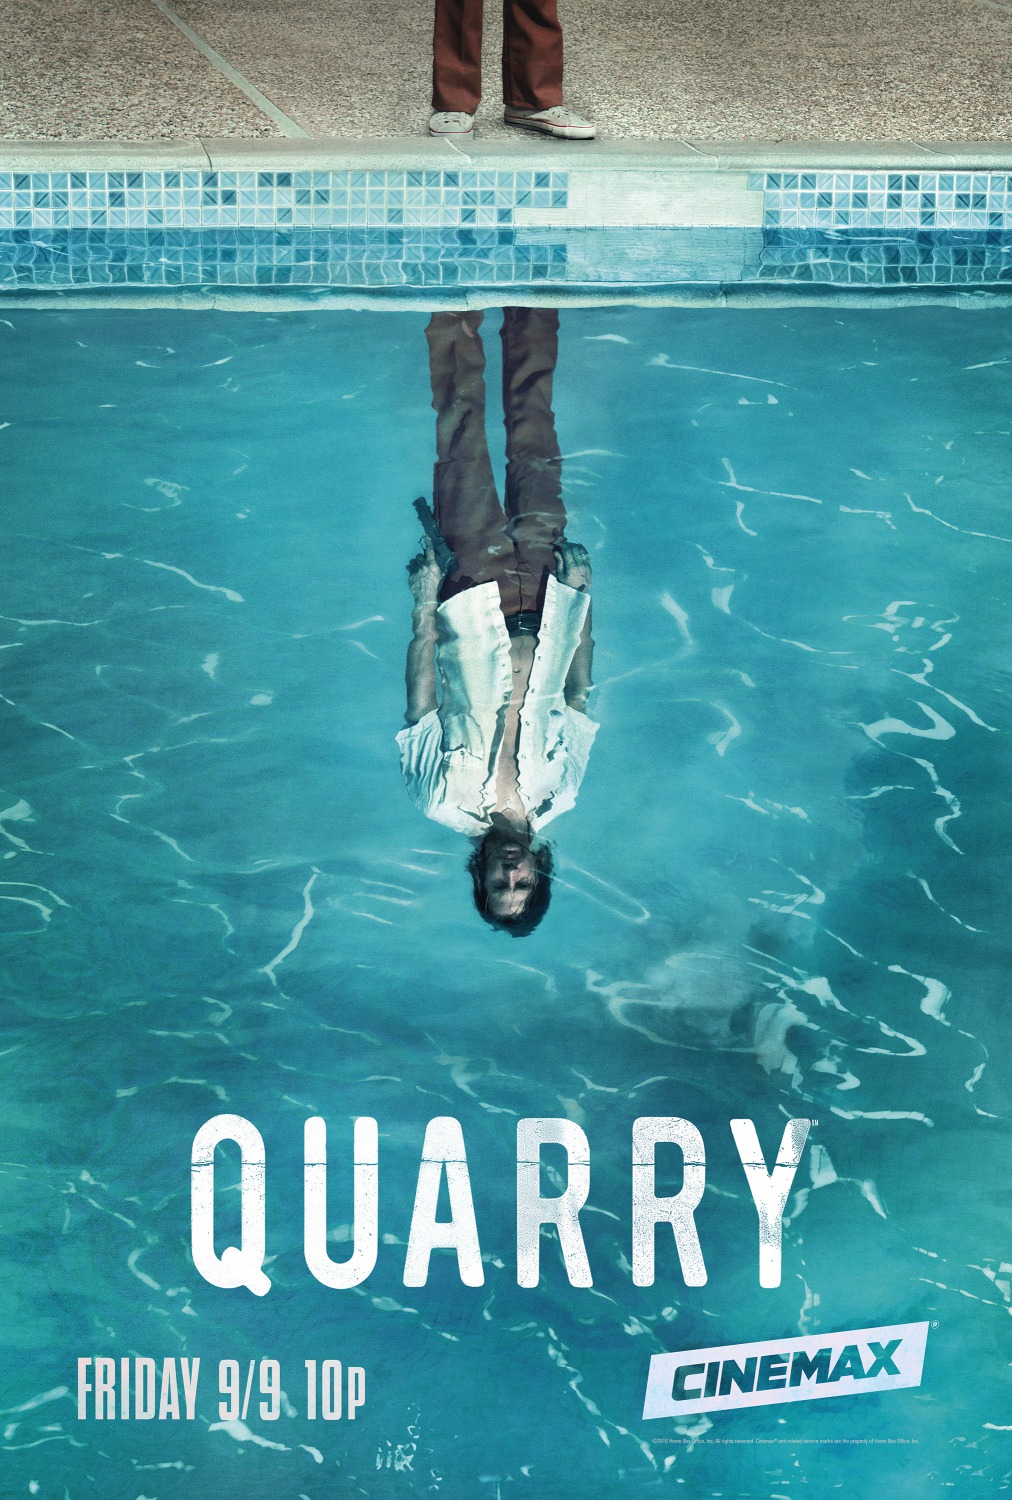 Extra Large TV Poster Image for Quarry 